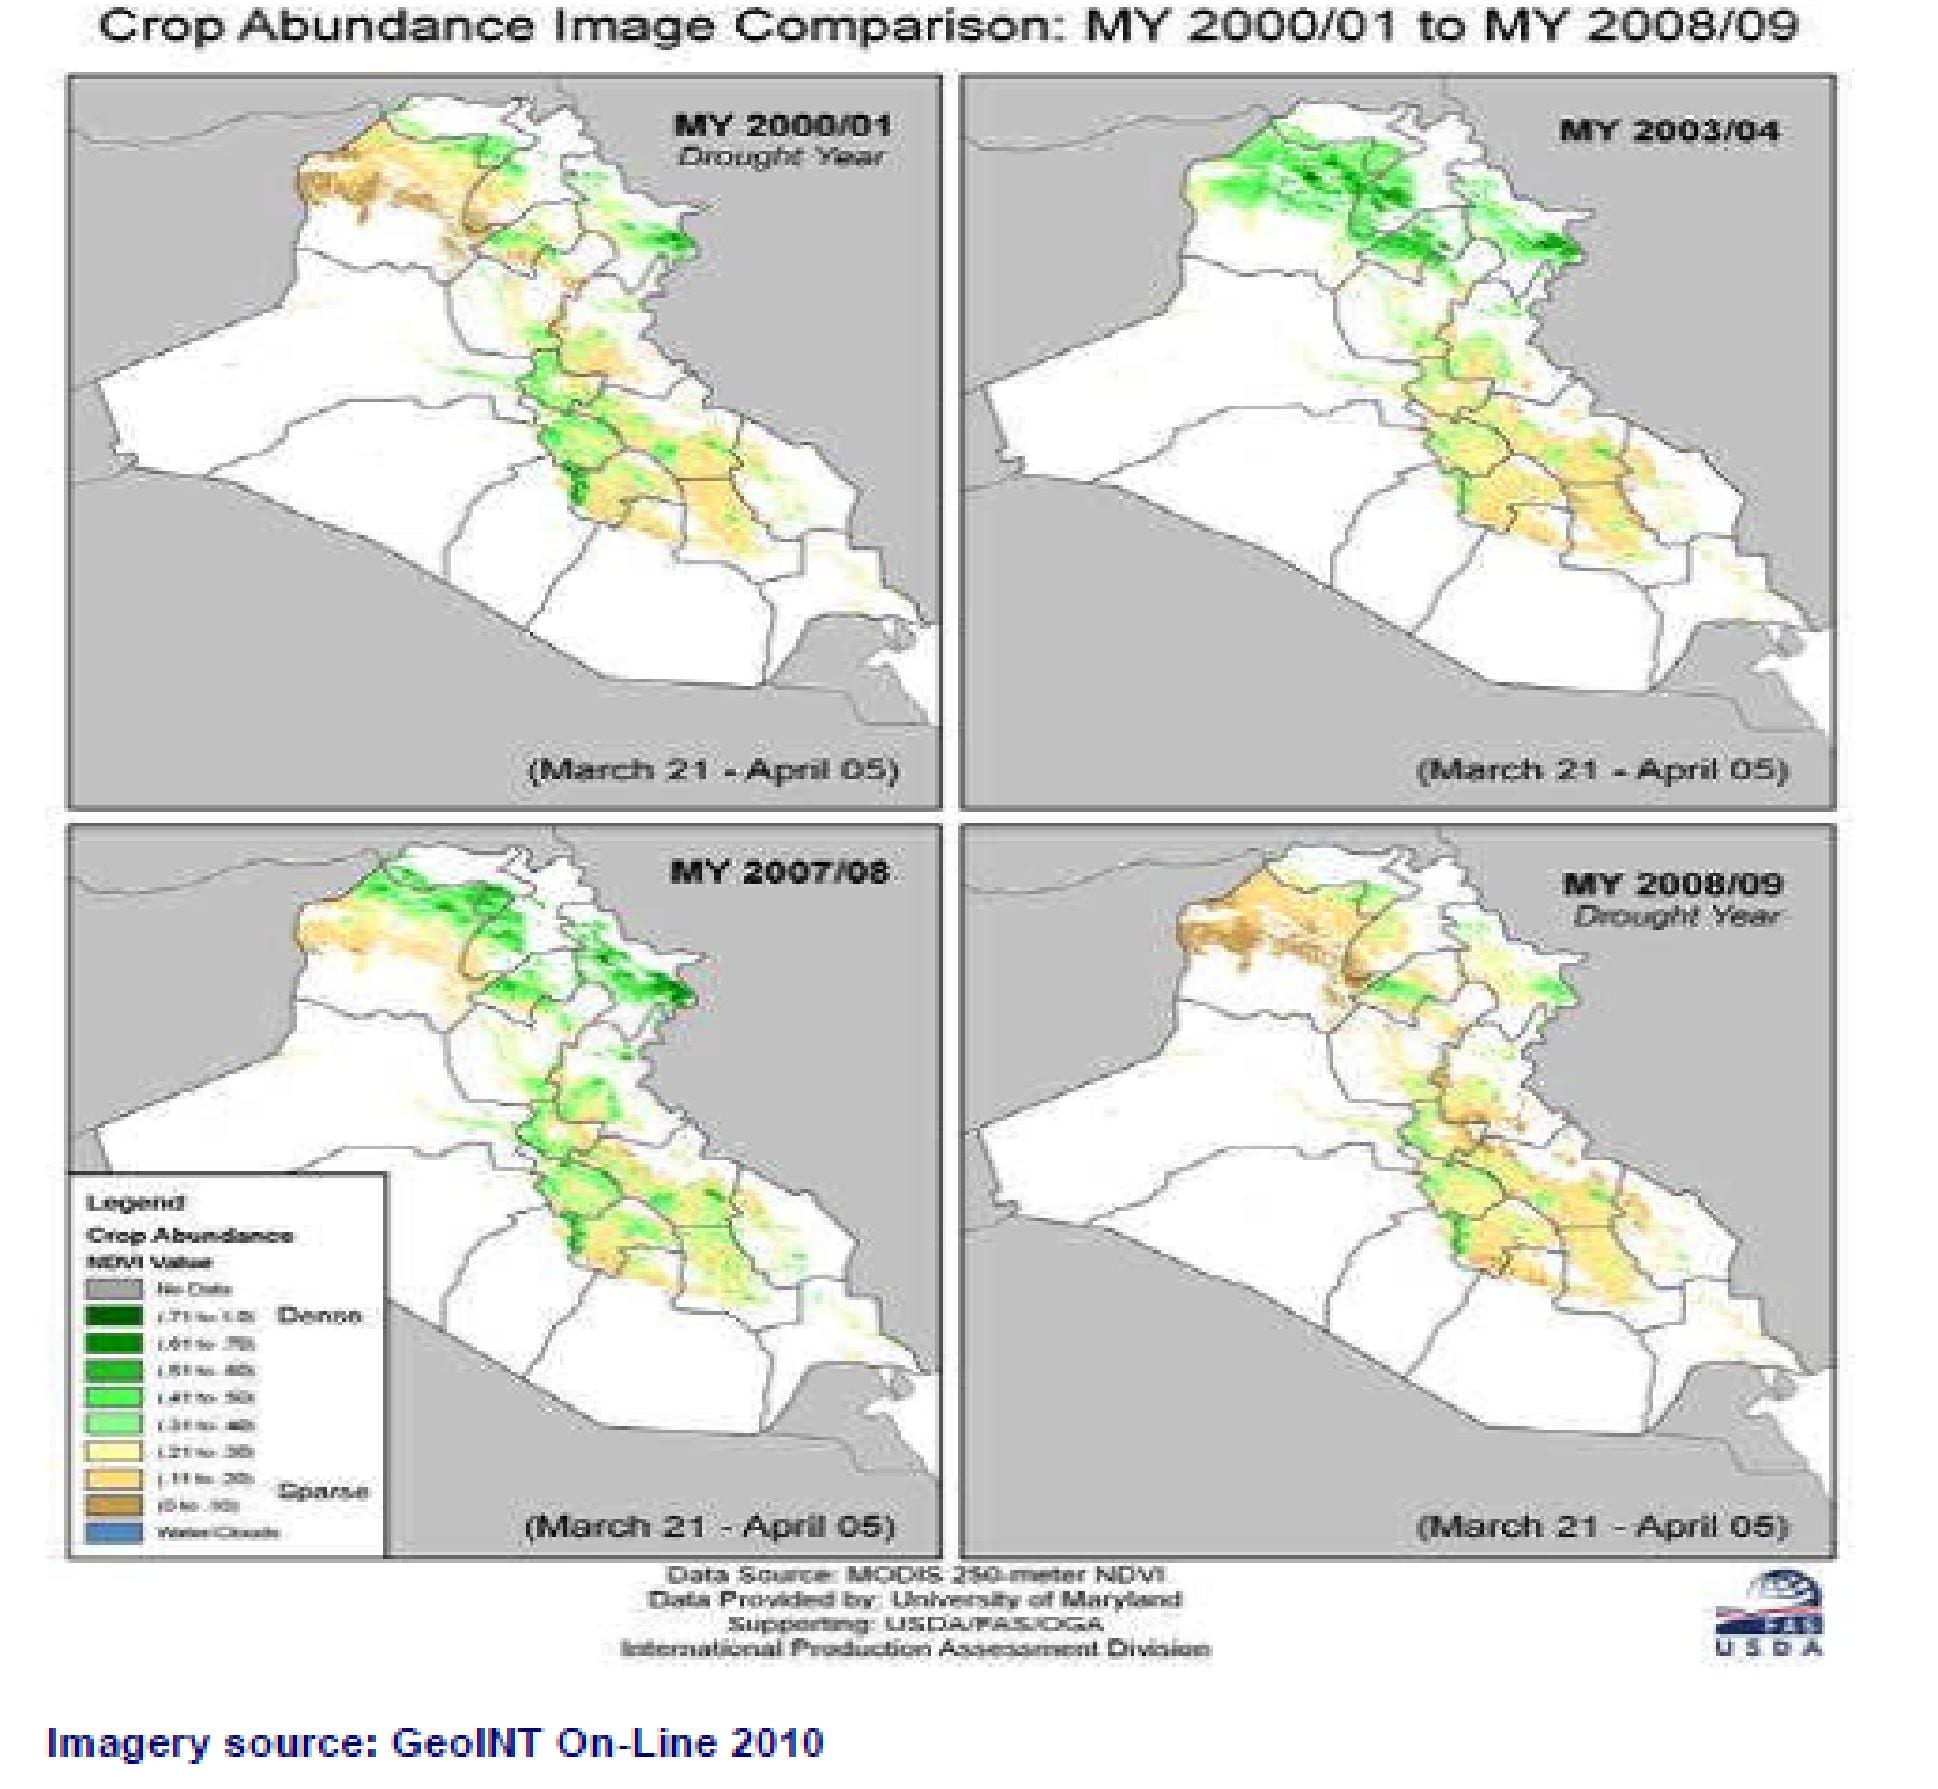 Figure showing four images documenting crop abundance changes over the years.